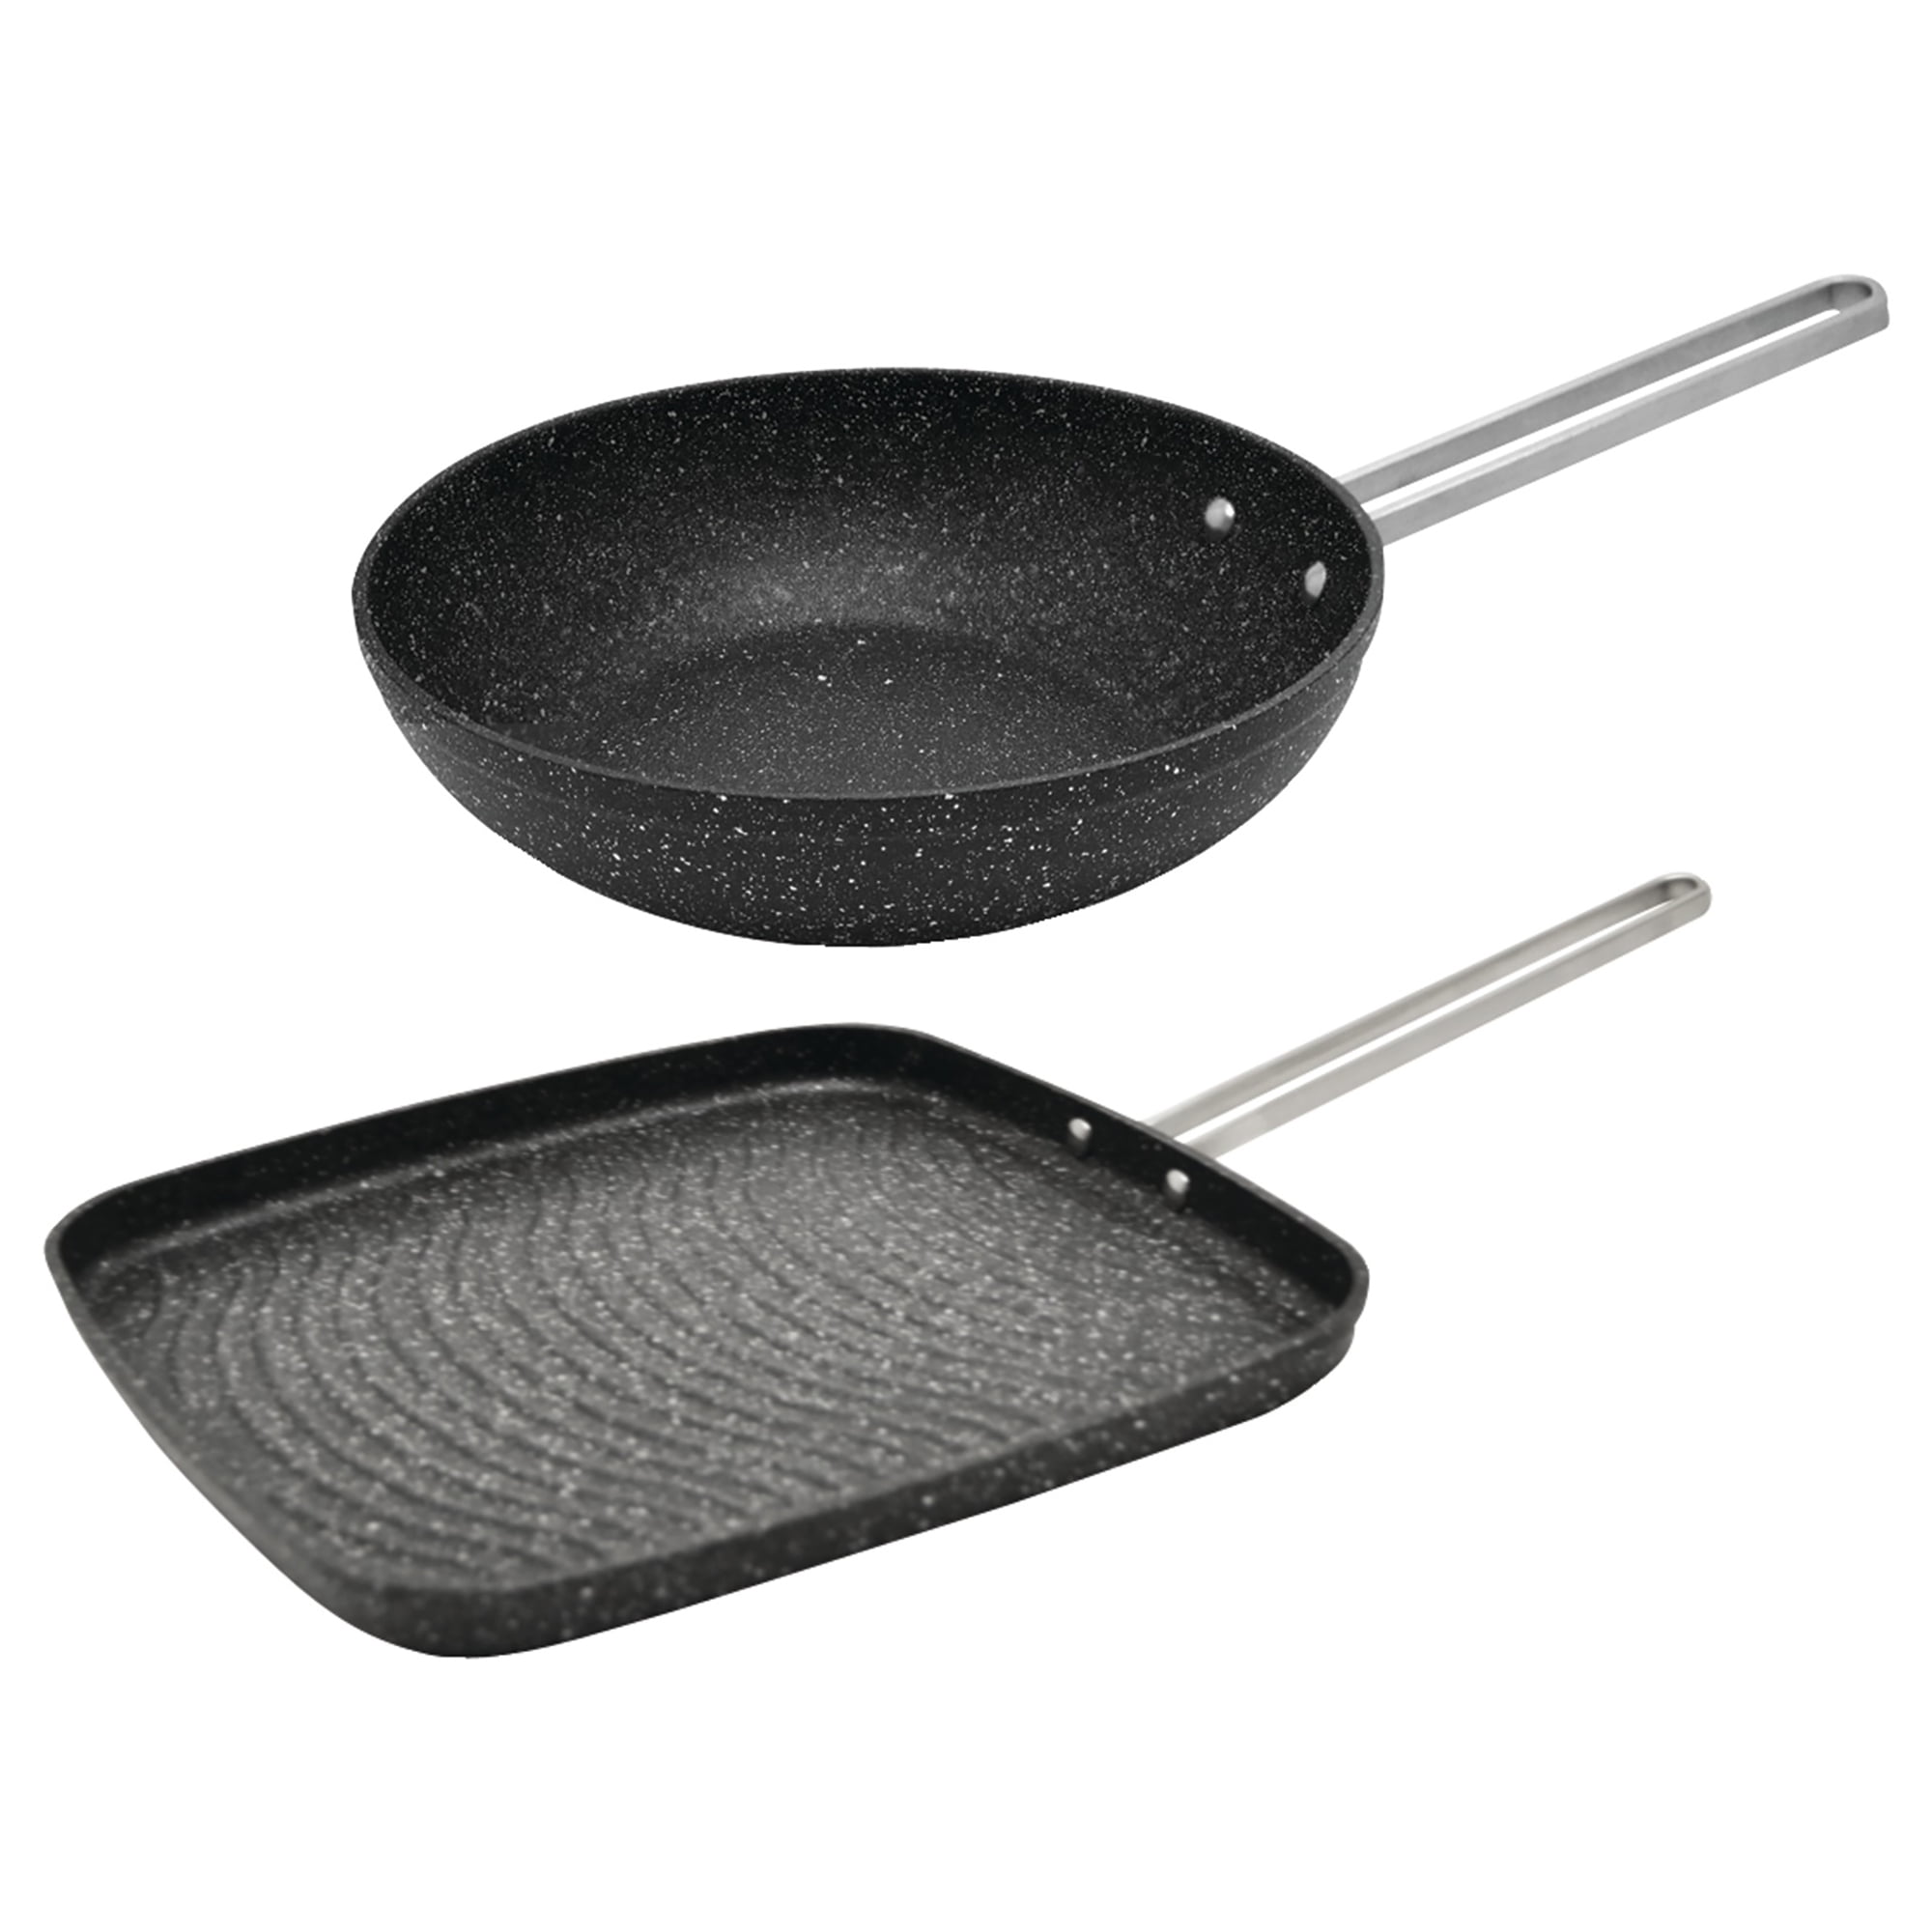 Fox Run Nonstick Oval Roasting/Cooling Rack 11.75 x 10.5 Inches 